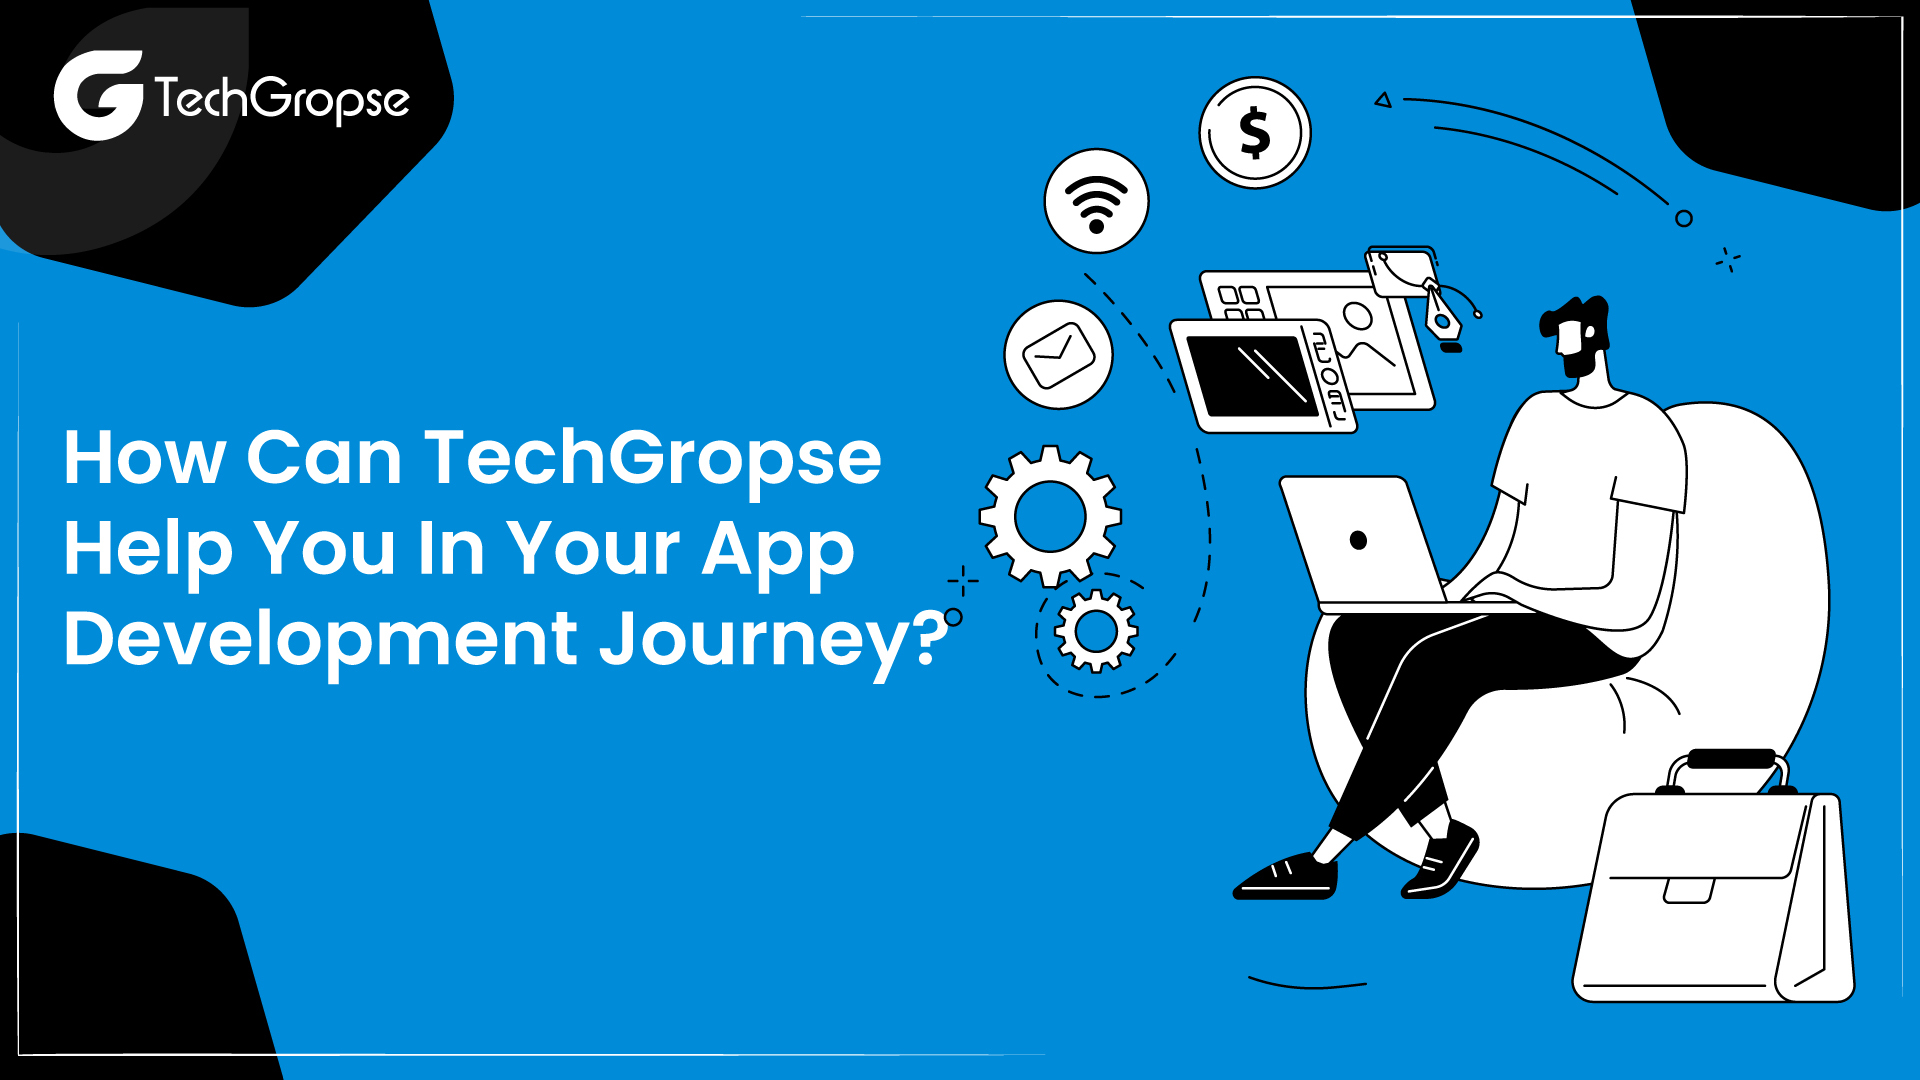 How Can TechGropse Help You In Your App Development Journey?